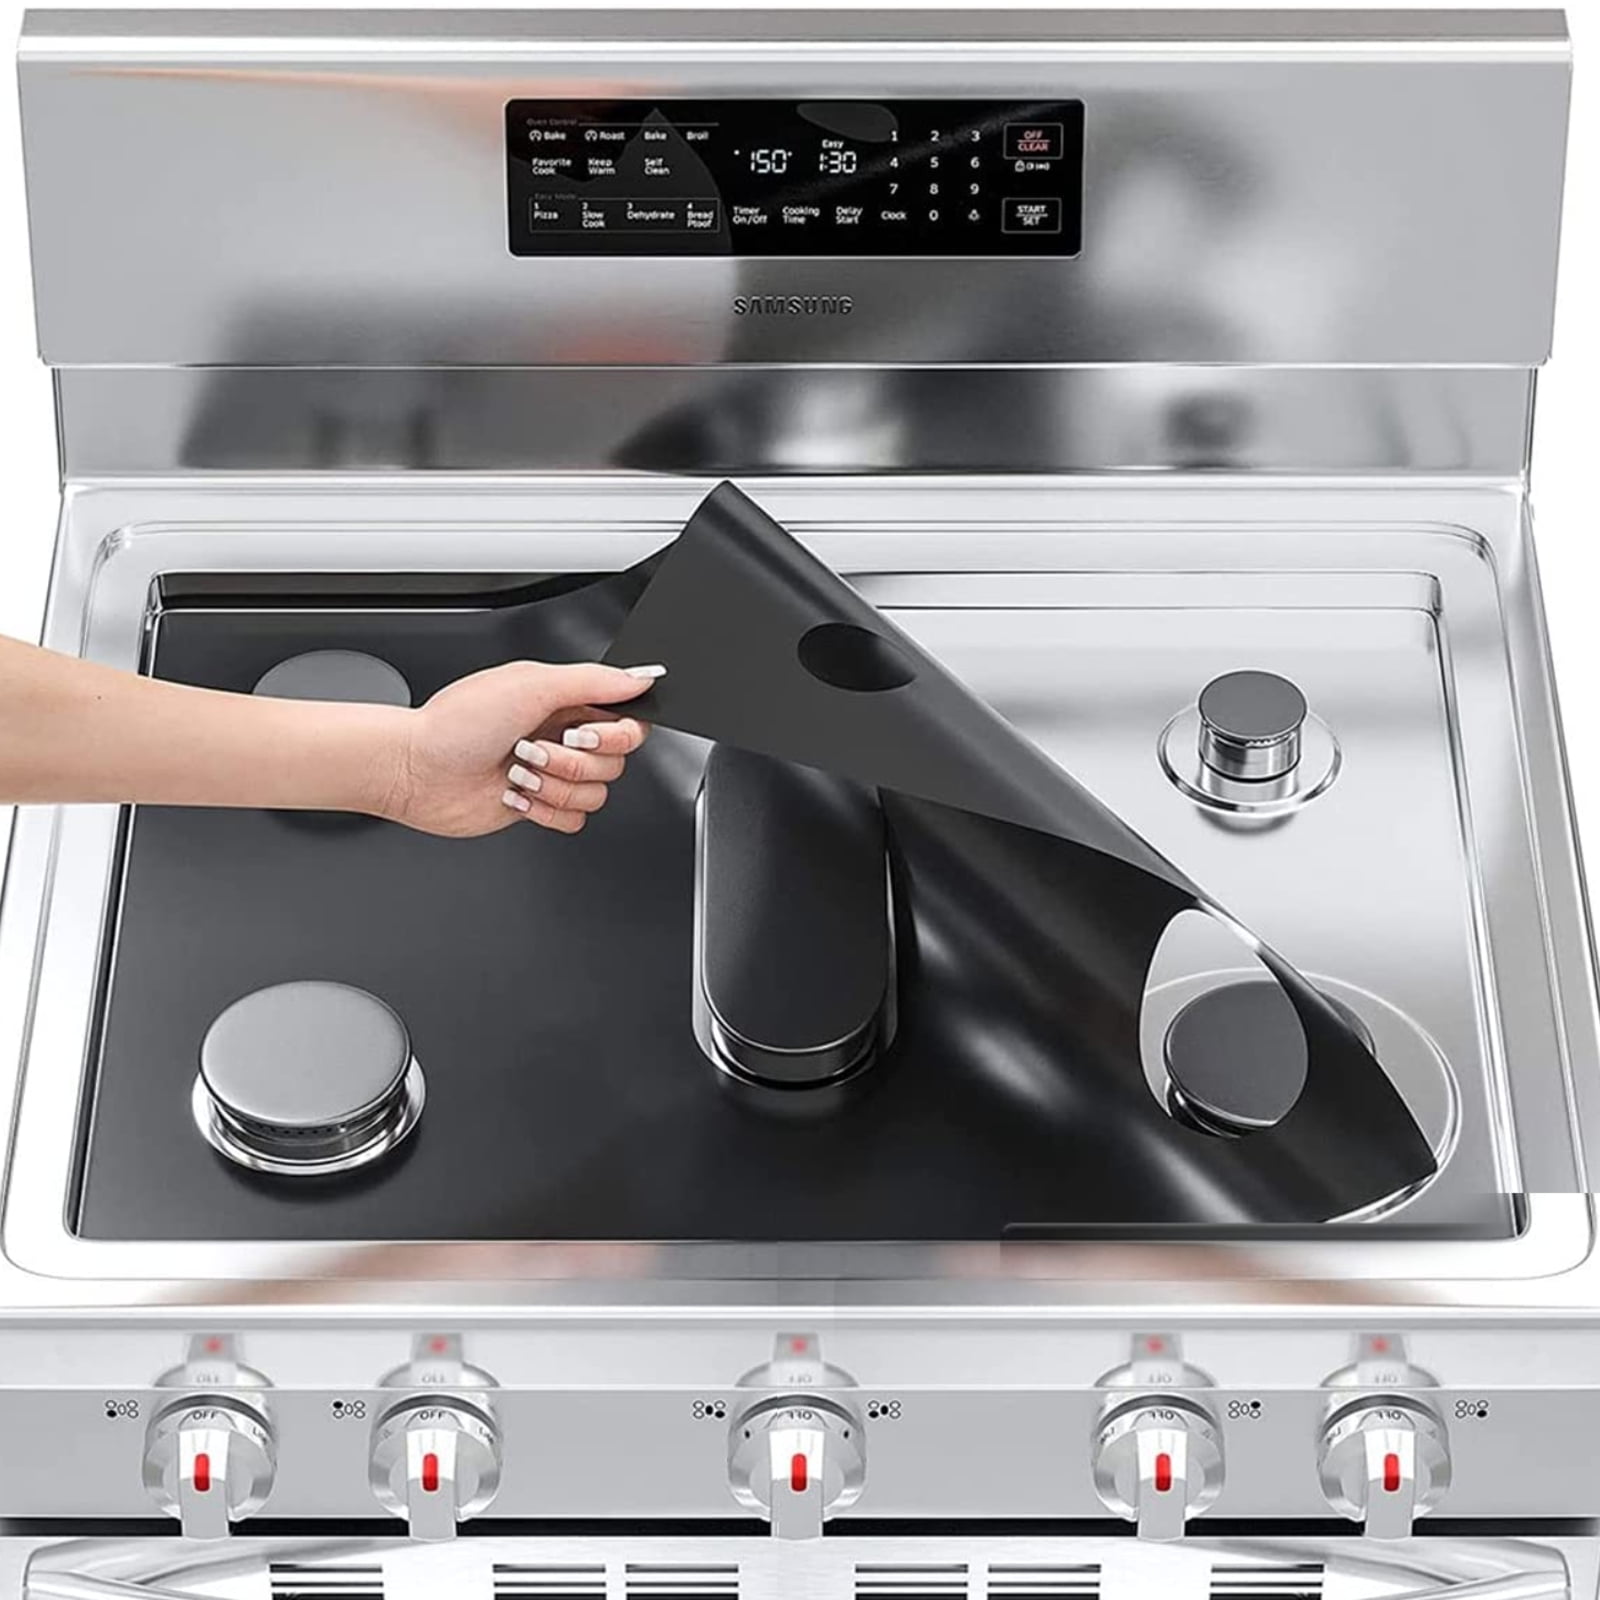 Stove Cover - DIY GAS Stove Top Covers for Samsung LG GAS Range 3 Pack with 2pcs Stove Gap Covers, Reusable Stove Covers for GAS Stove Top Non-Stick